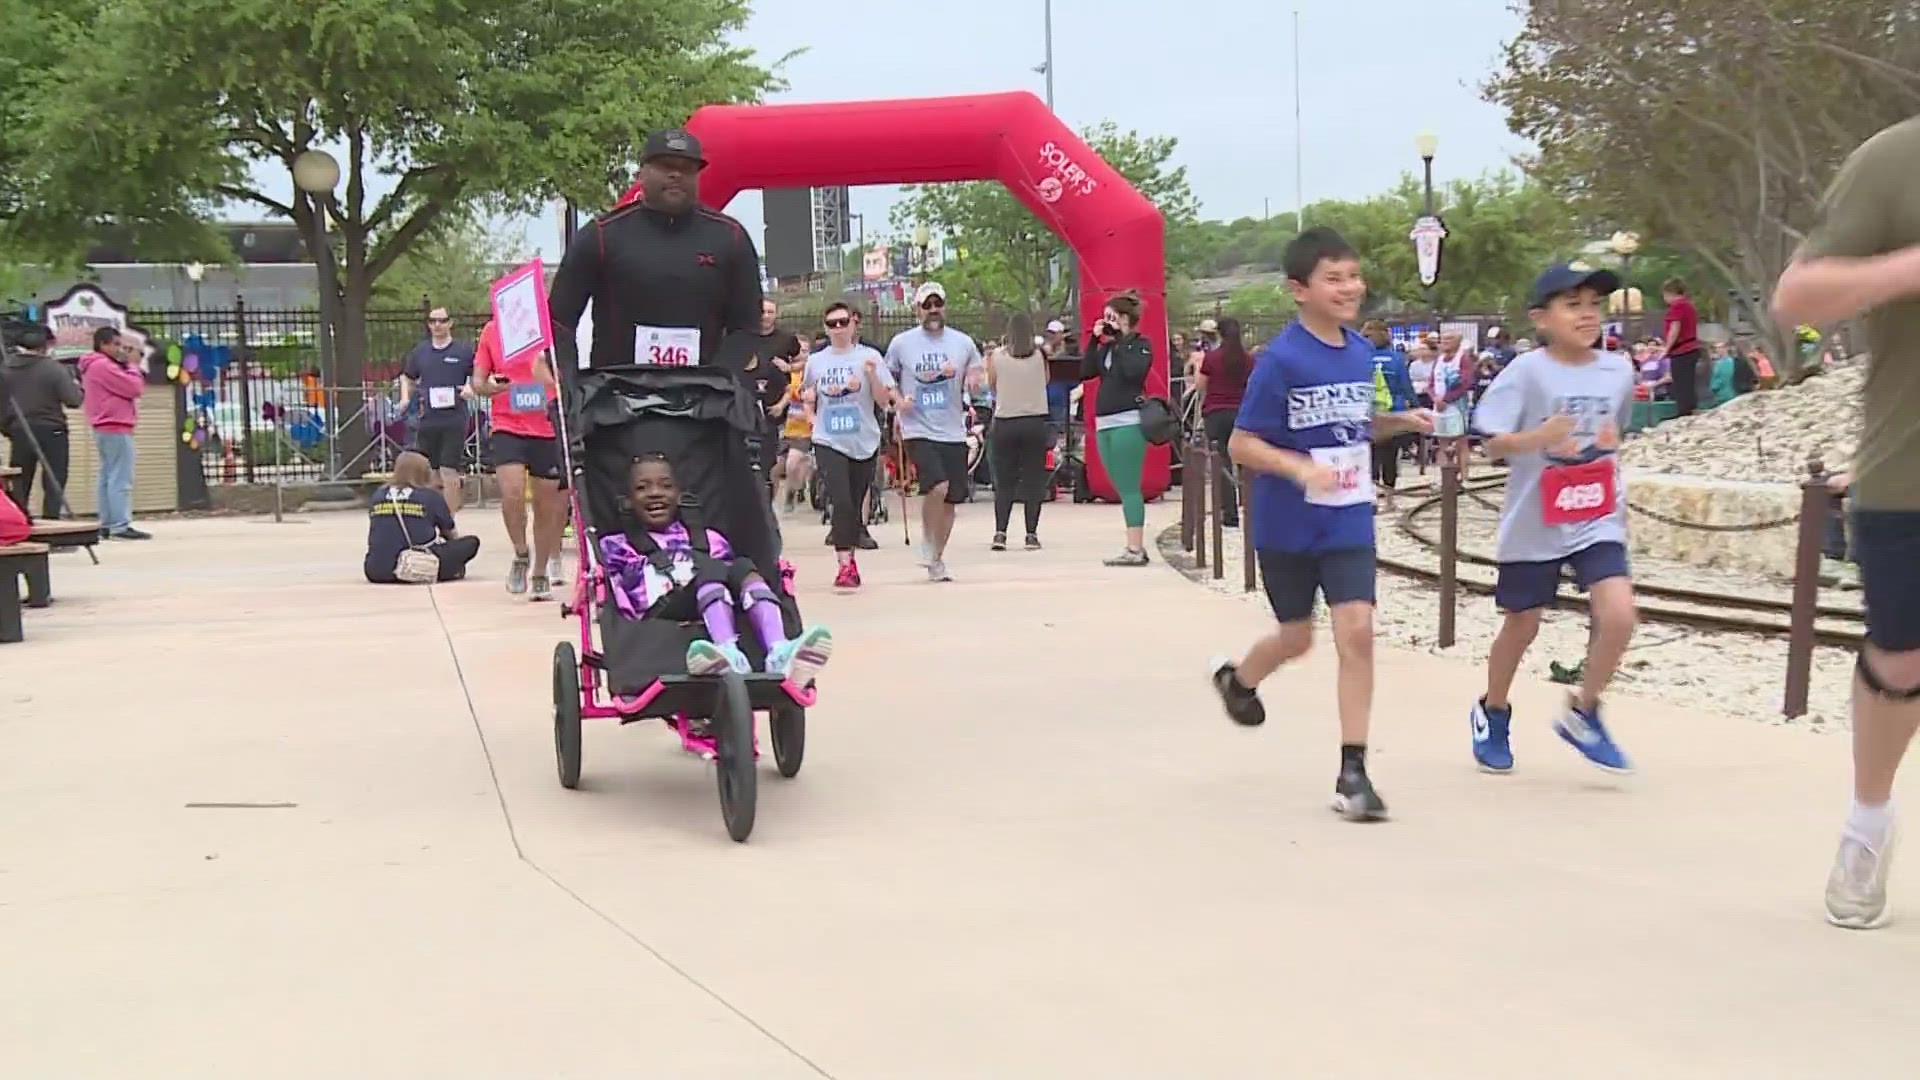 San Antonio’s Morgan’s Wonderland hosted the Let’s Roll 5K race, which benefited Project Mend and people who need assistive technology.